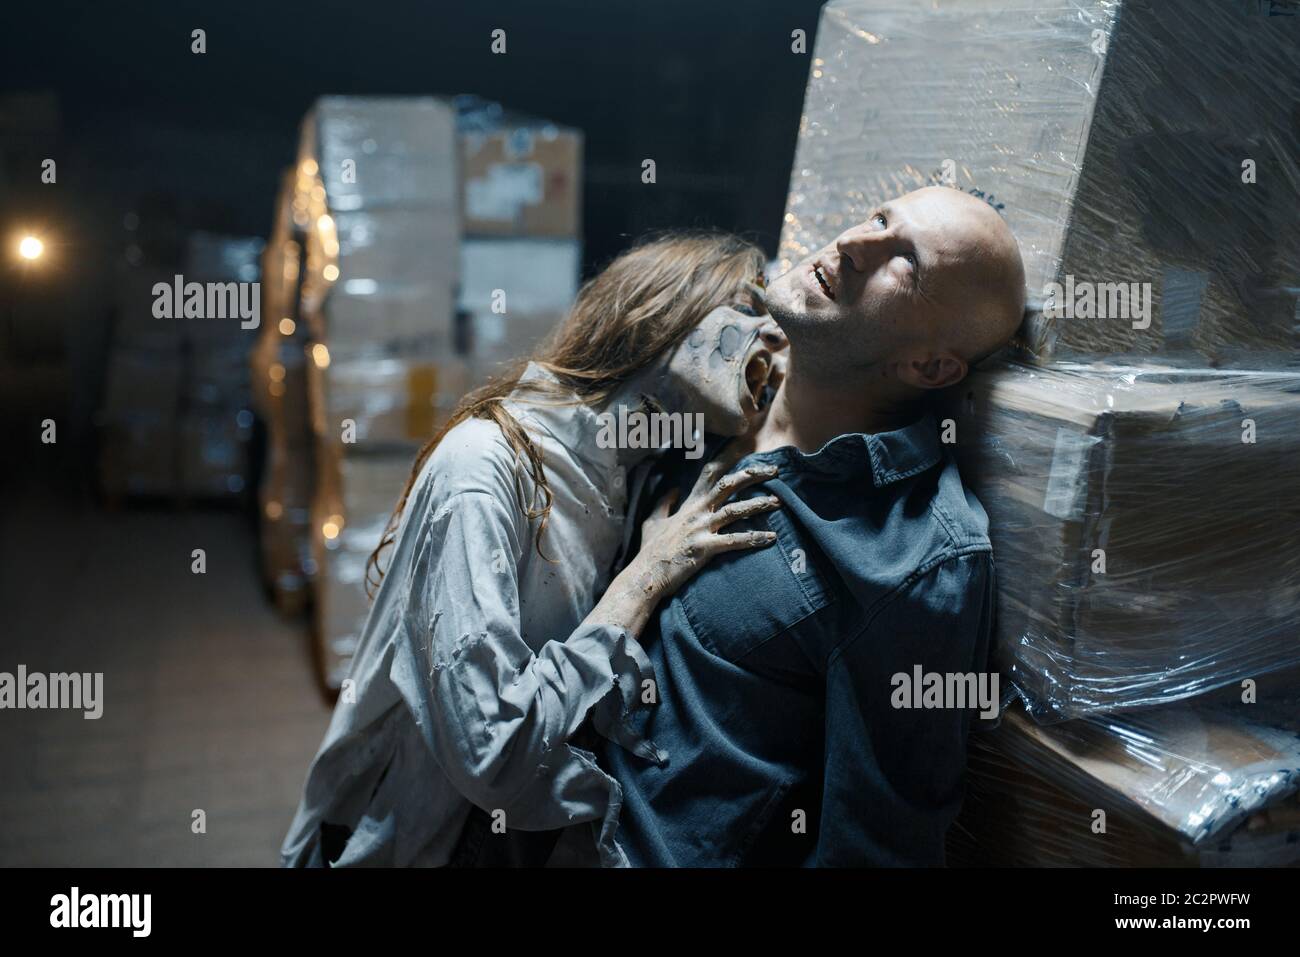 Female zombie bites a man in the neck, death trap, deadly chase. Horror in city, creepy crawlies attack, doomsday apocalypse Stock Photo